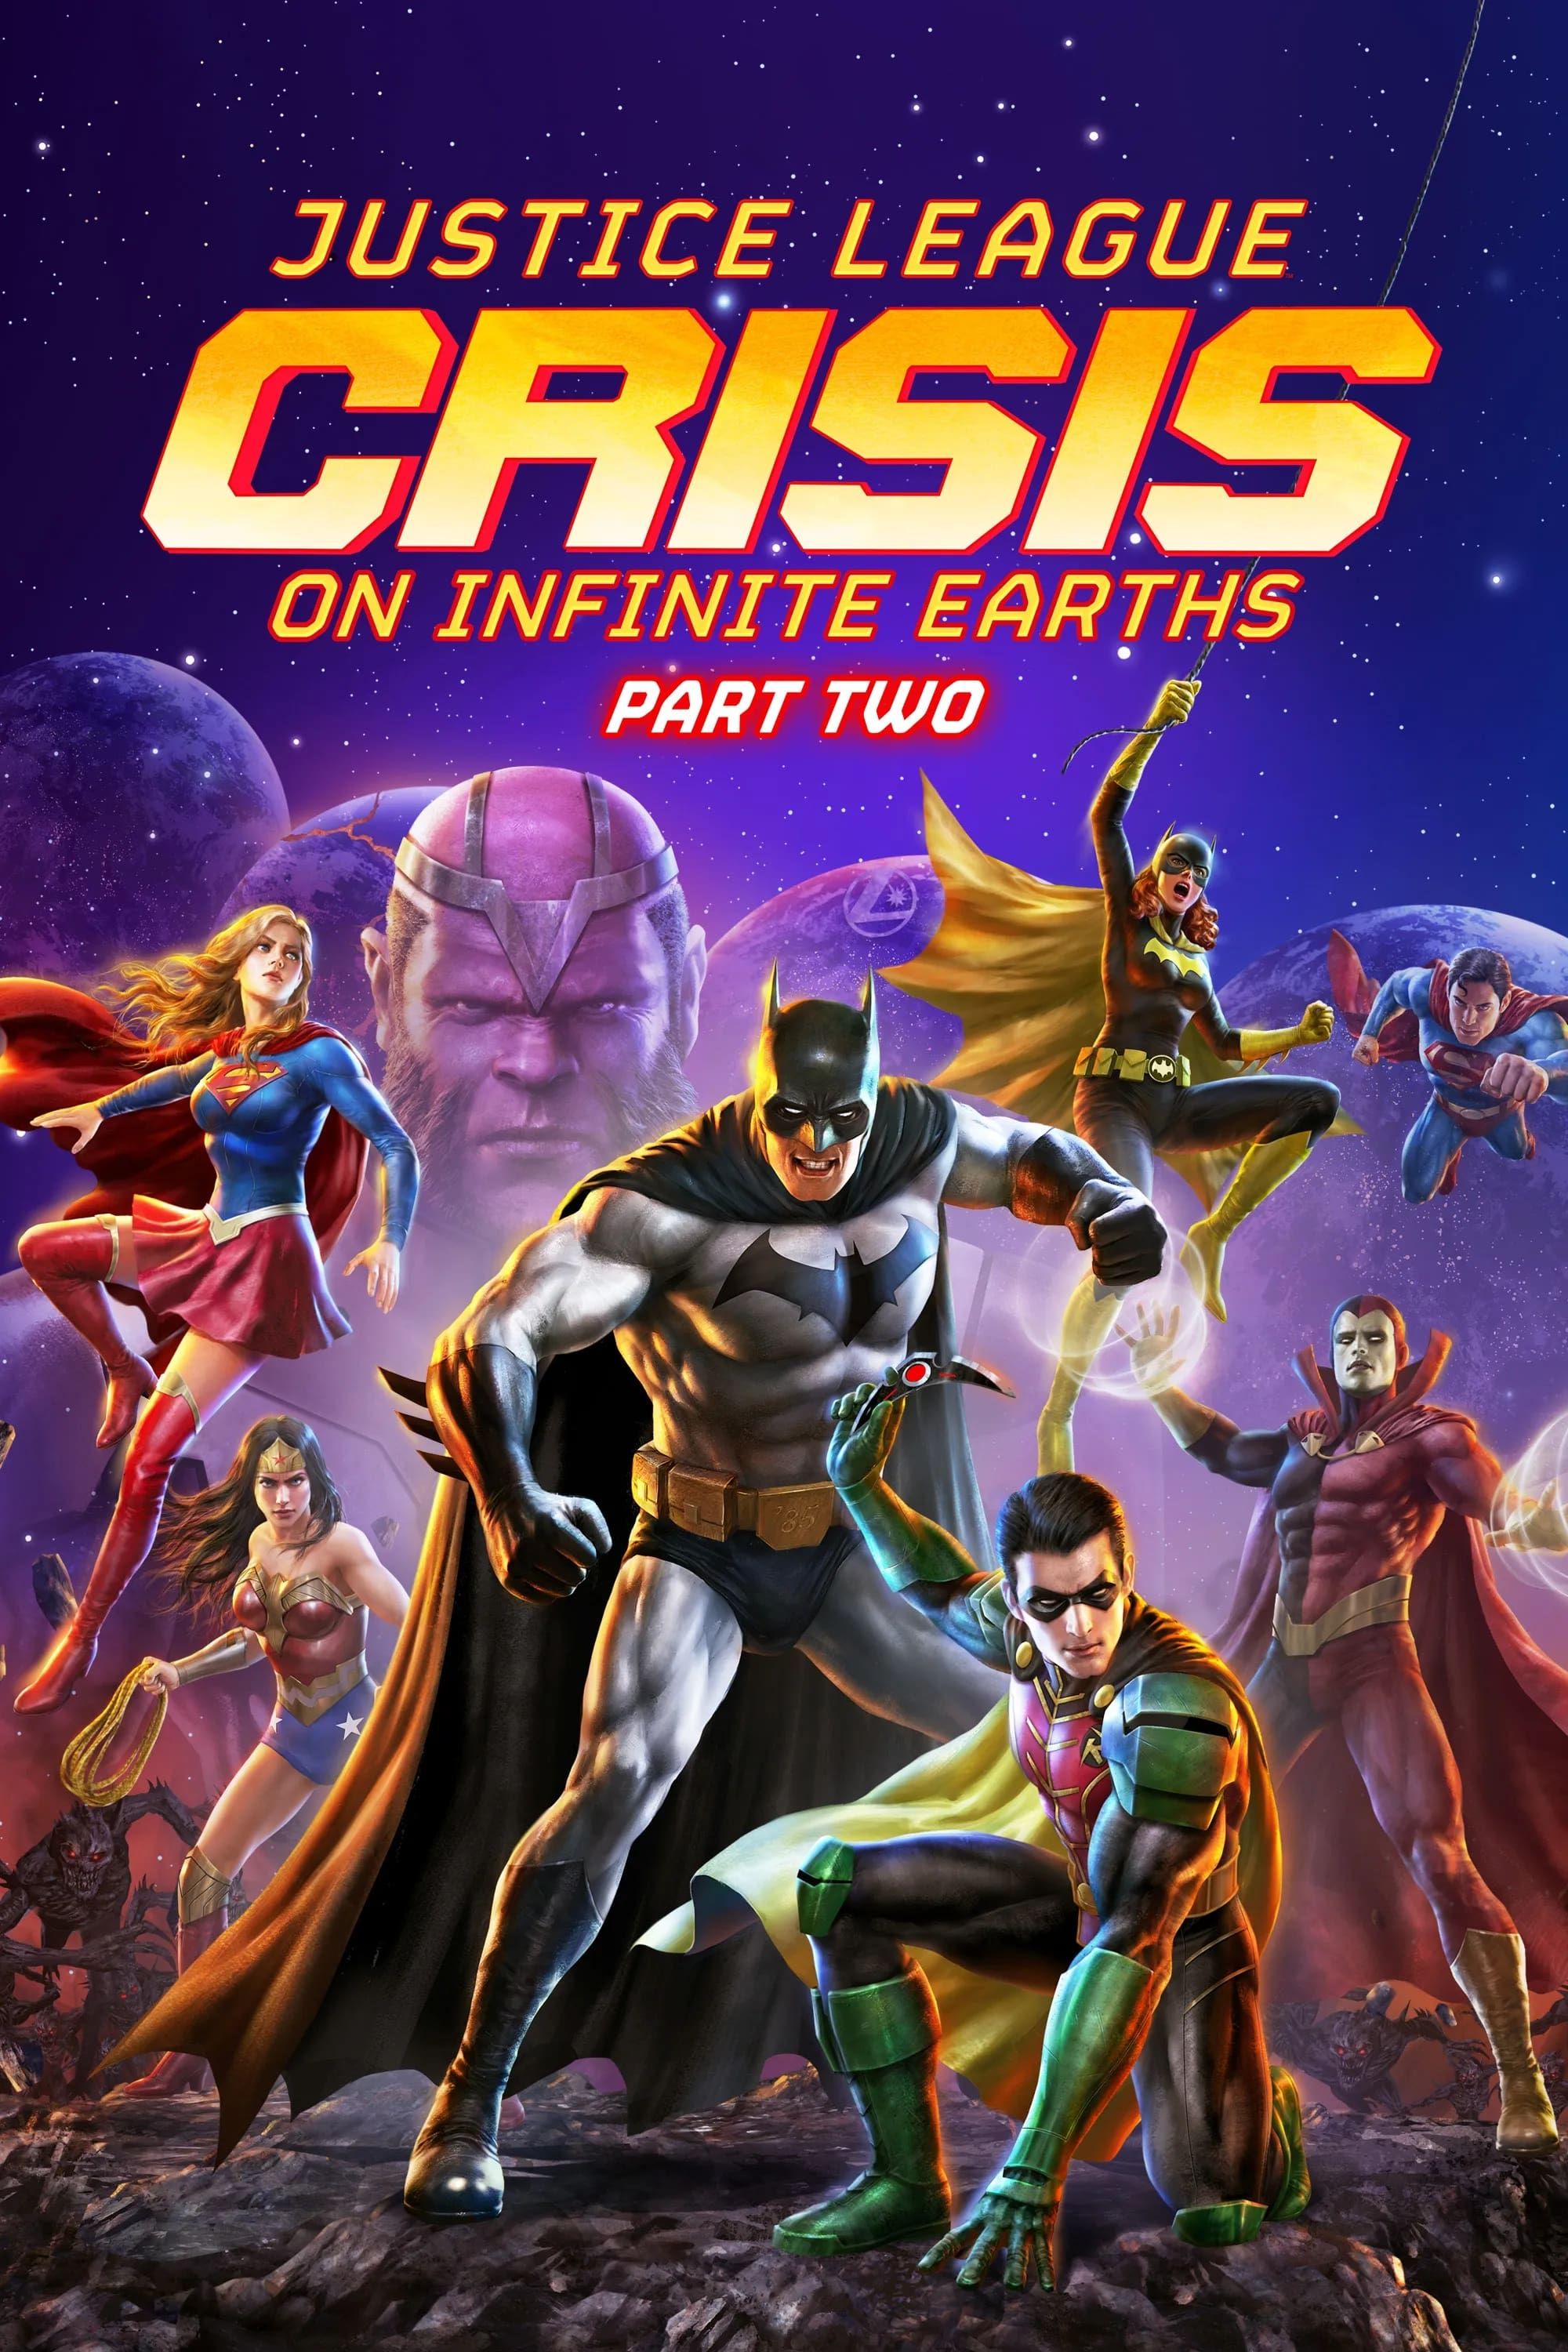 Justice League- Crisis on Infinite Earths - Part Two Poster with Batman, Robin, Wonder Woman, Superman, and Batgirl